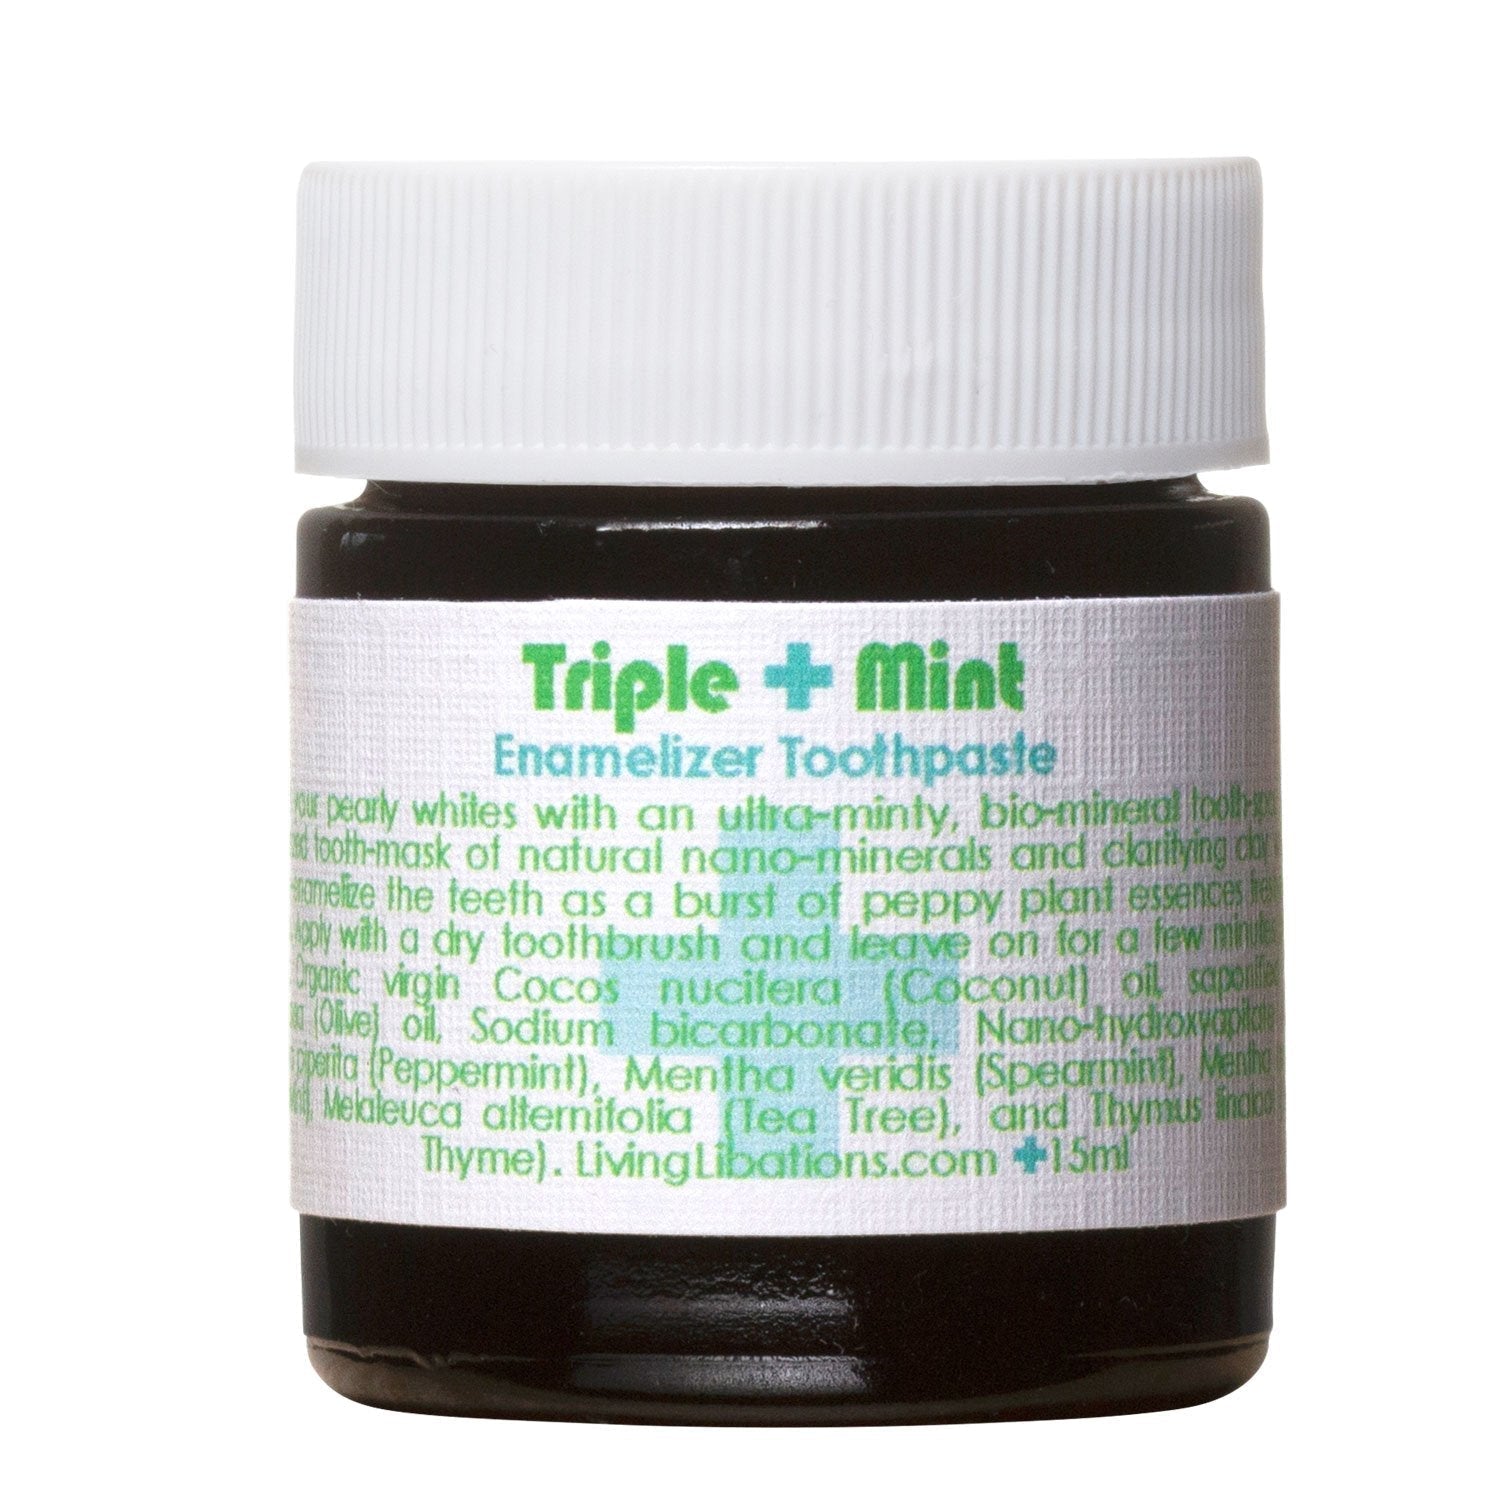 Triple Mint Enamelizer Toothpaste - Fast Shipping